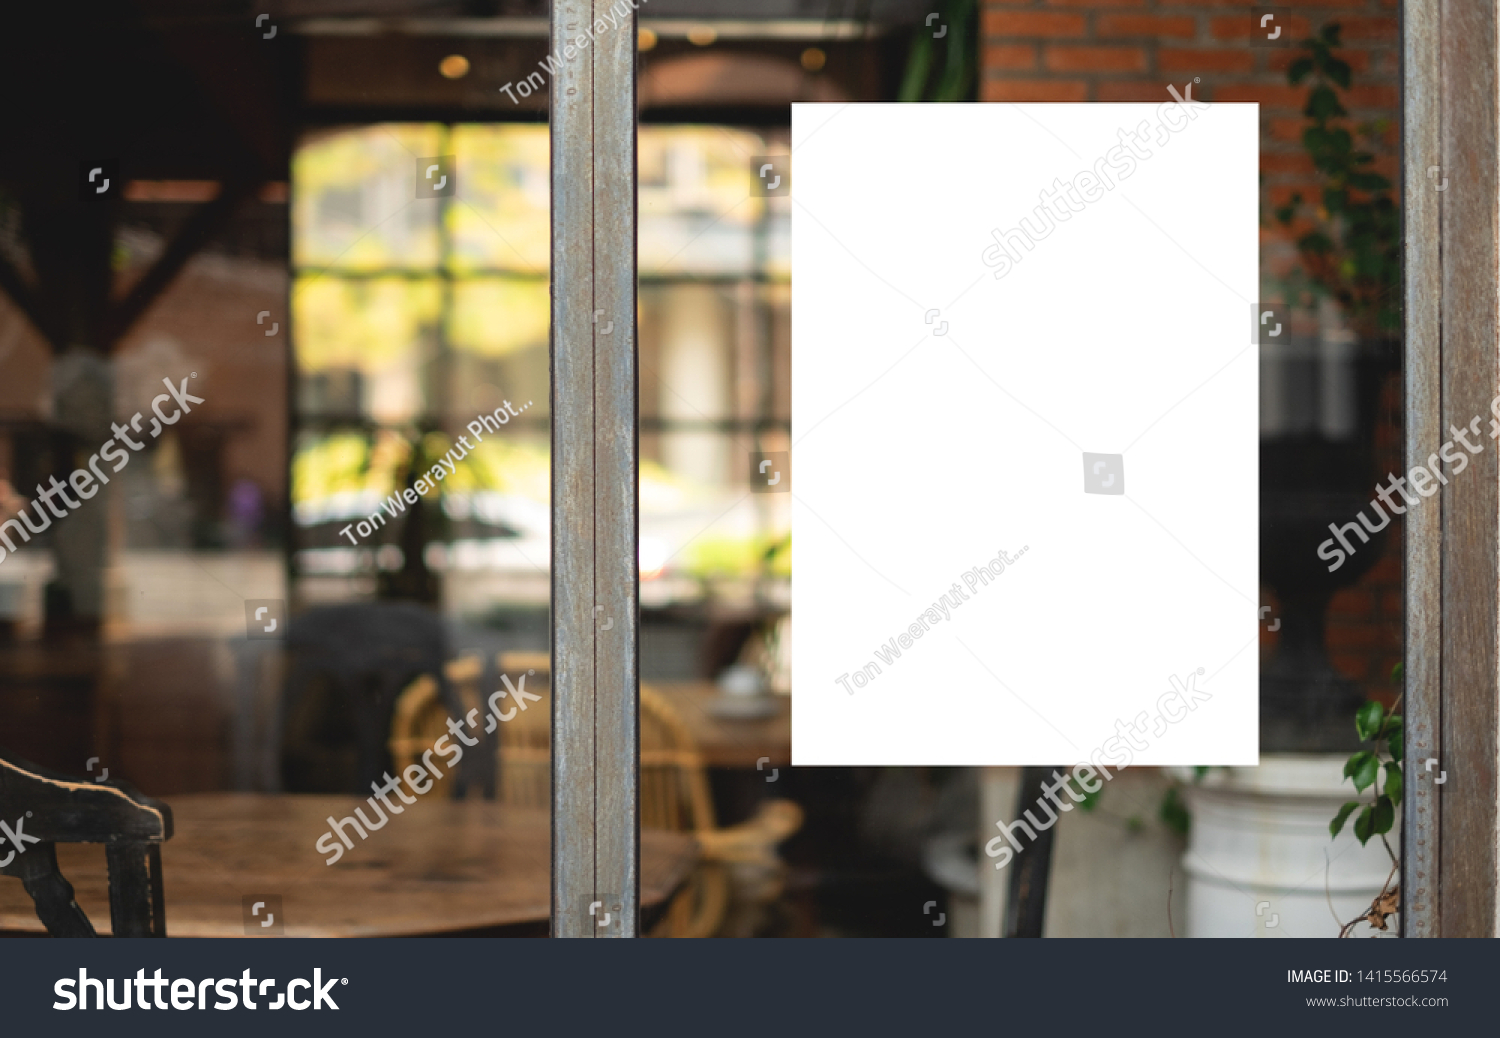 White paper poster mockup displayed outside the building restaurant. Marketing and business concept.  #1415566574